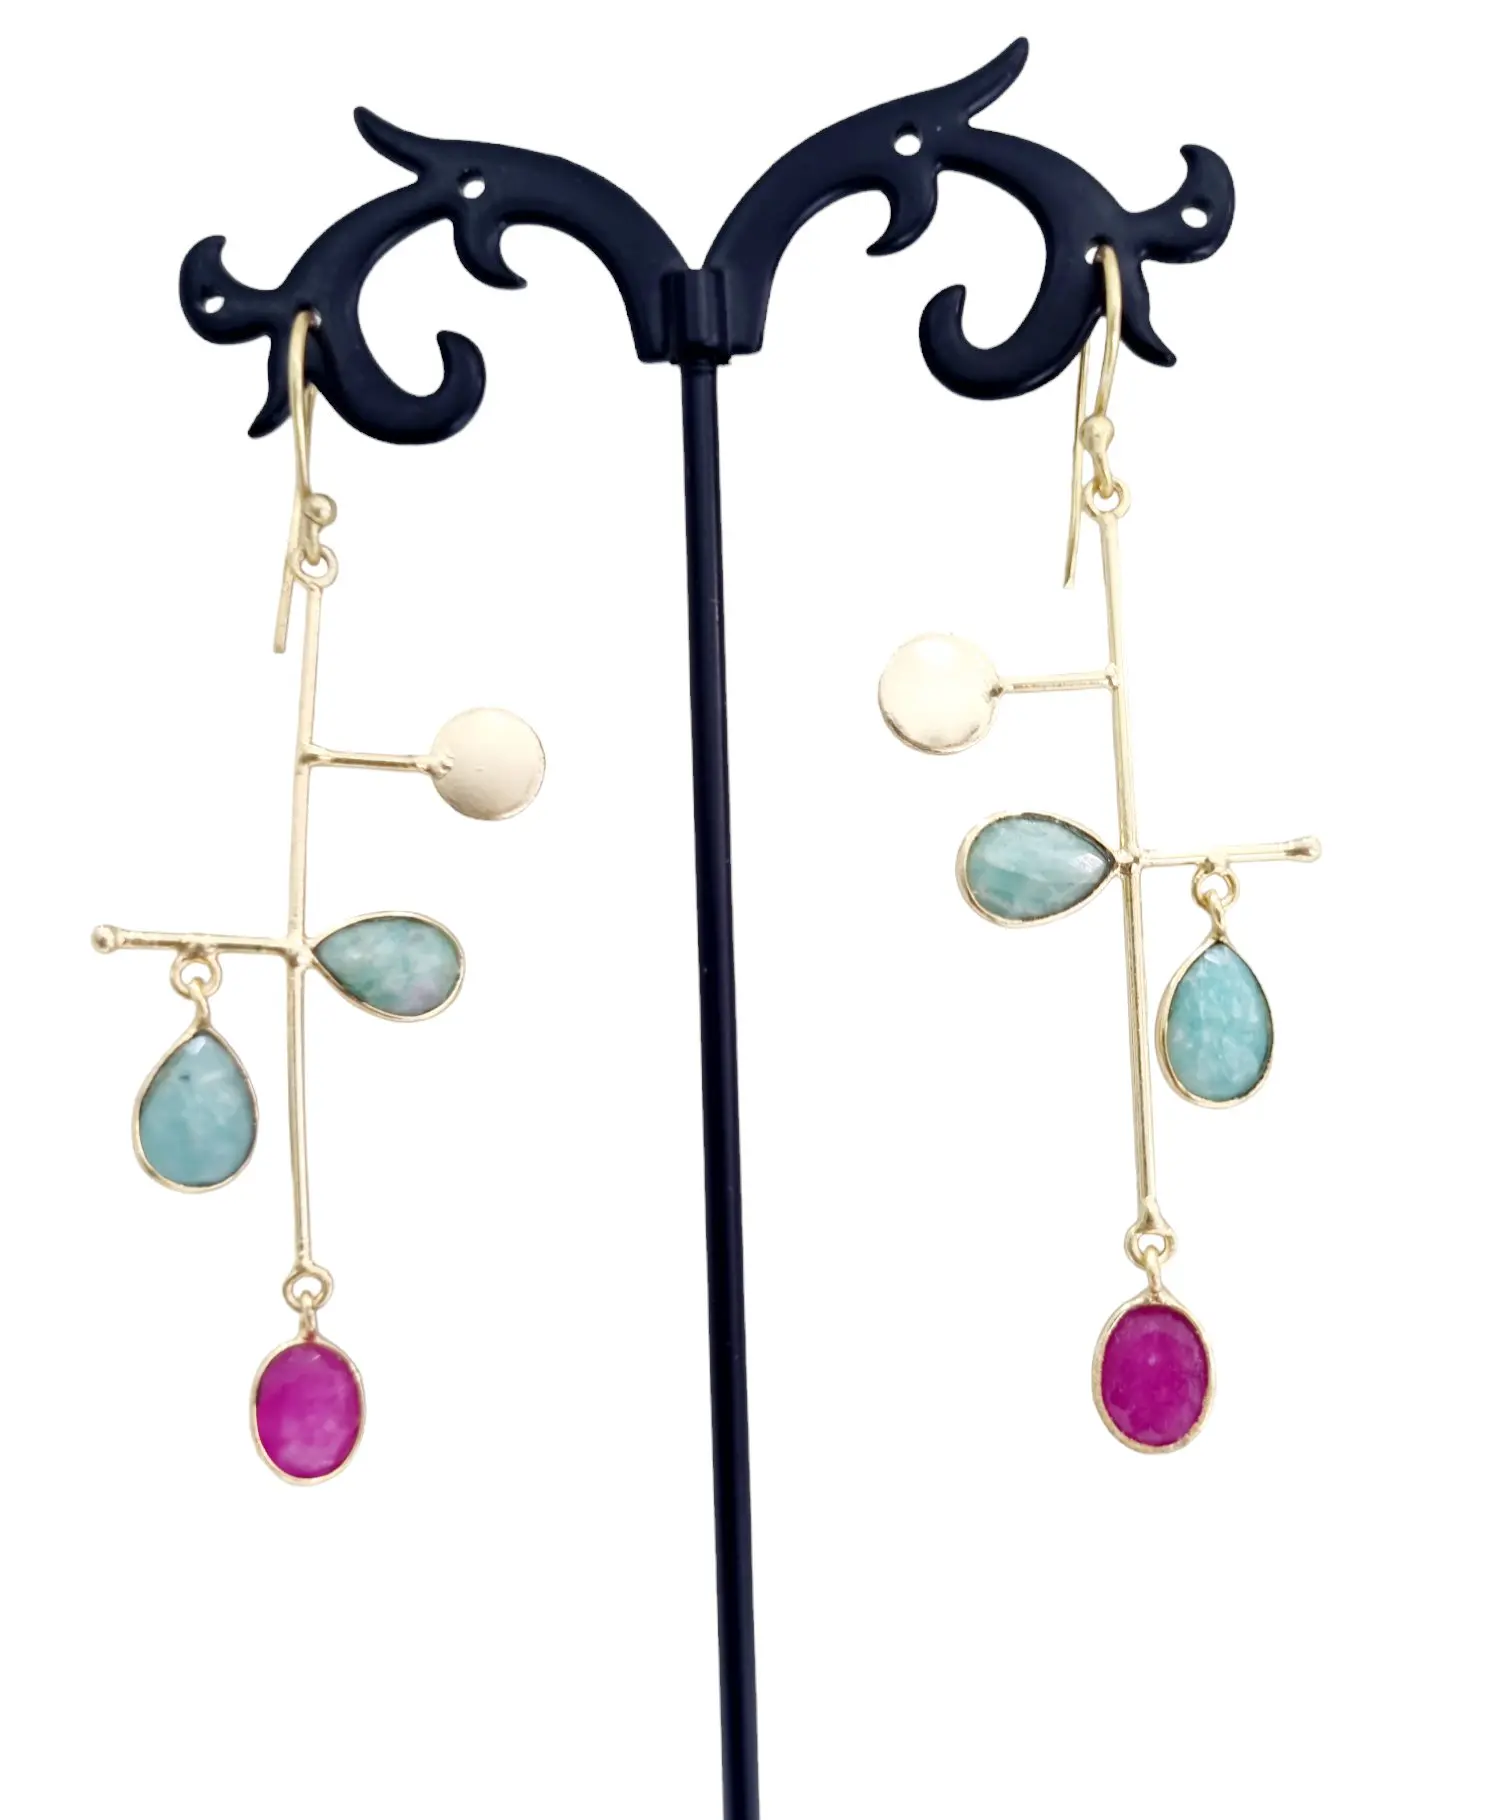 Earrings made with ruby root brass and amazonite. Length 7.5cm Weight 3gr